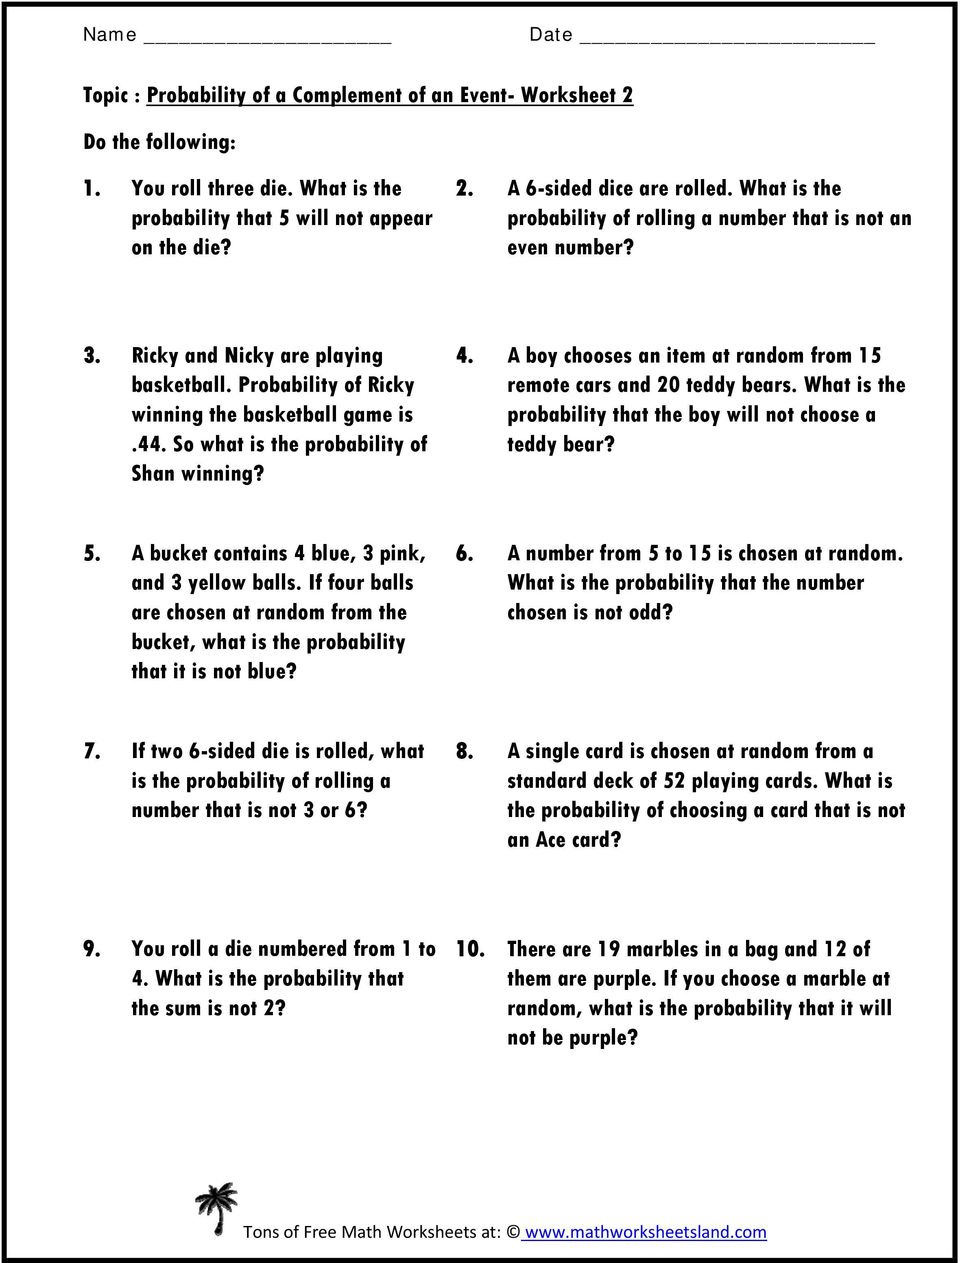 Topic : Probability of a Complement of an Event- Worksheet 11. Do With Simple Probability Worksheet Pdf